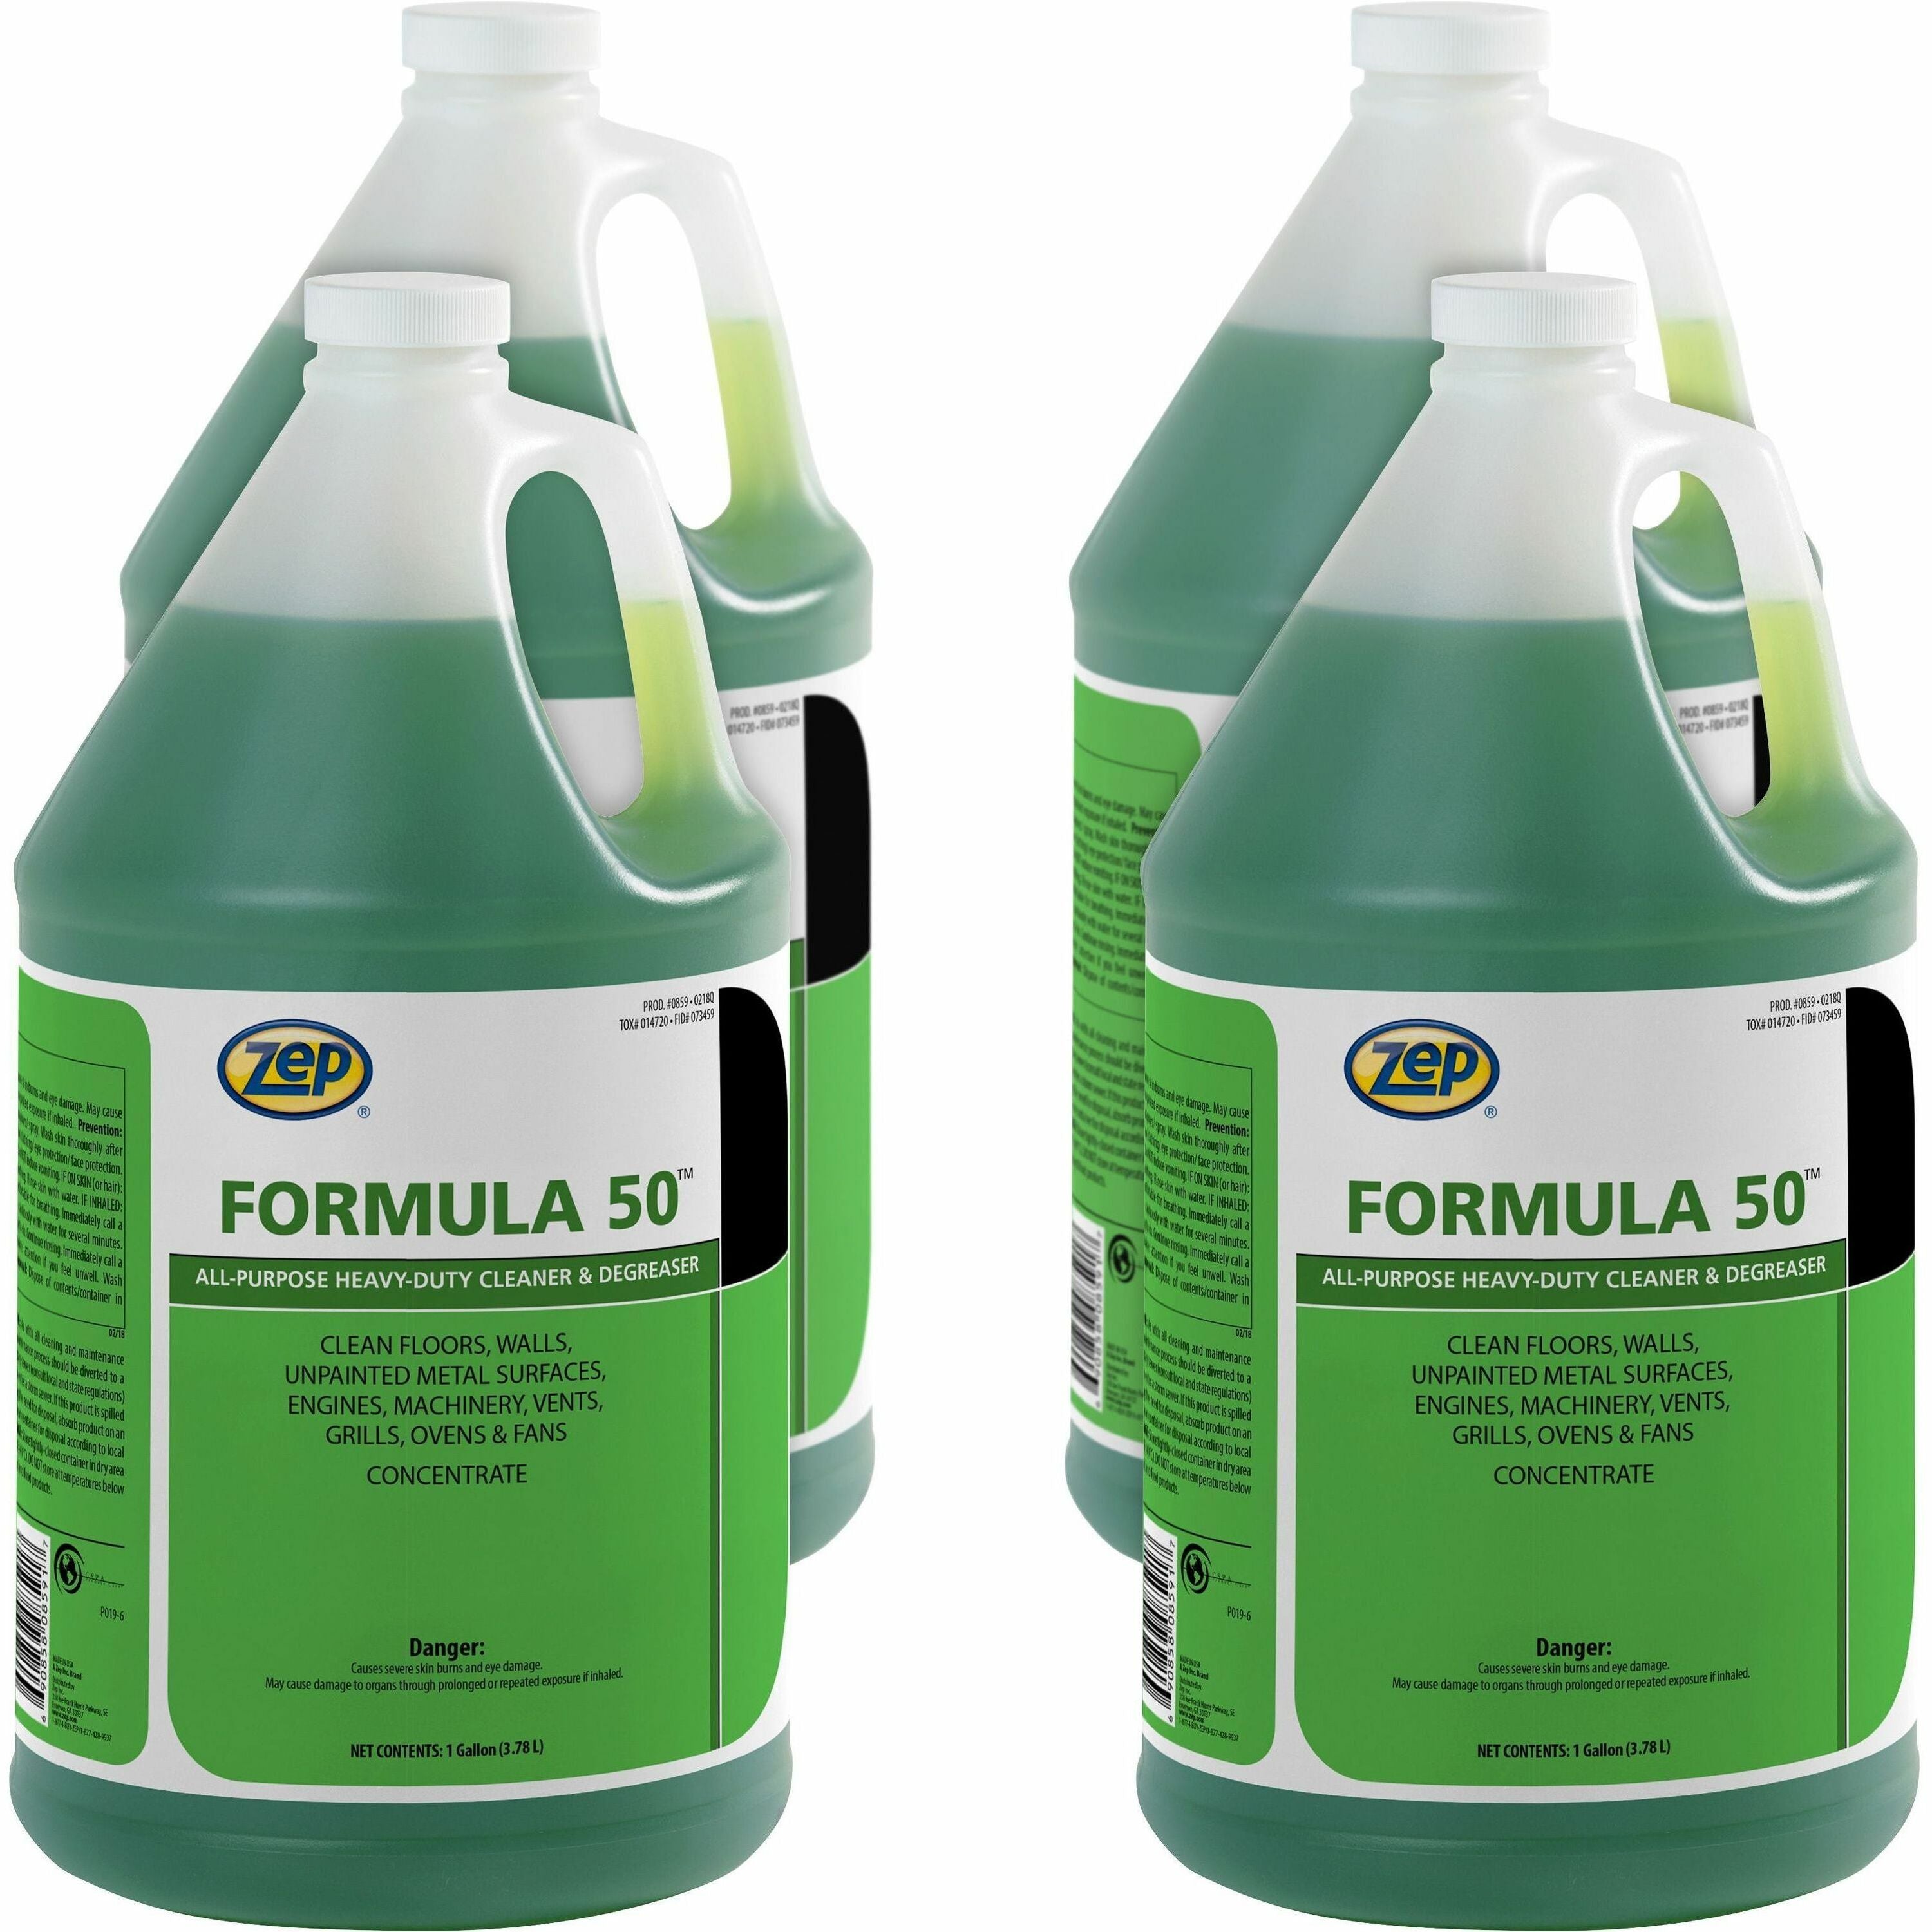 Zep Commercial Formula 50 Heavy-duty Cleaner/Degreaser - 128 fl oz (4 quart) - 4 / Box - Heavy Duty, Water Based, Water Softening, Water Soluble, Petroleum Free, Caustic-free, Phosphate-free, Non-toxic - Blue Green